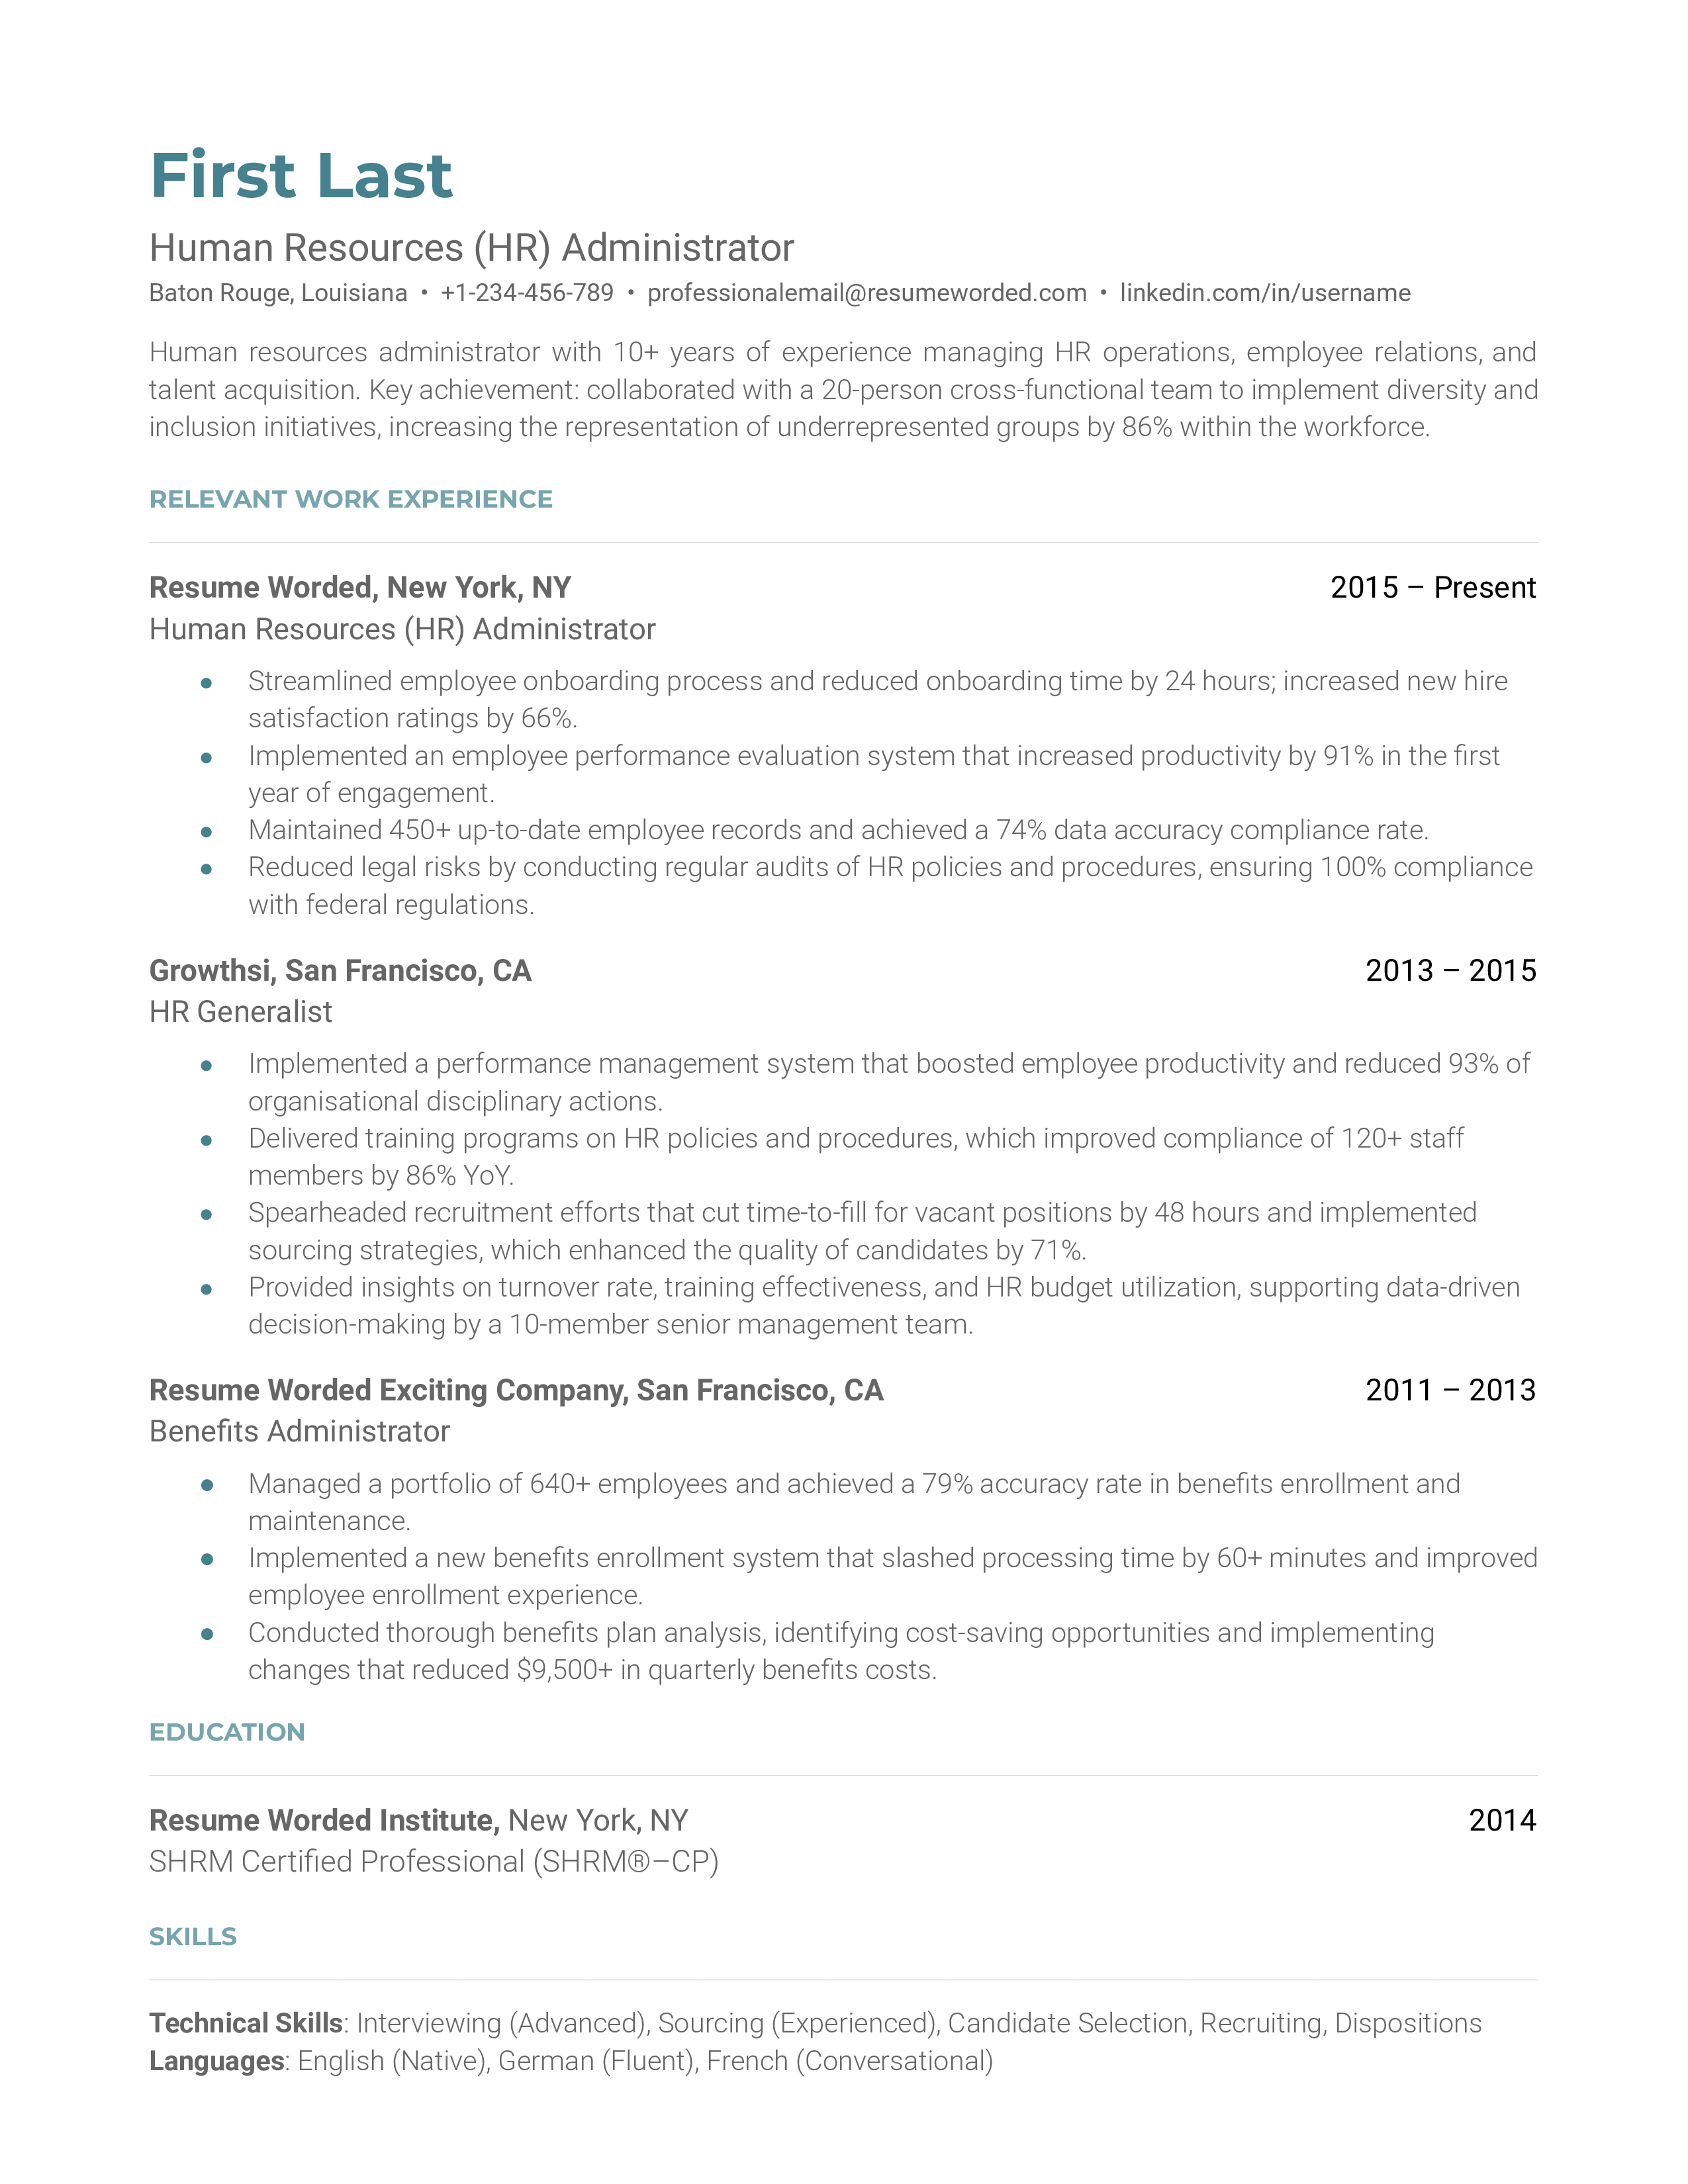 A CV screenshot for an HR Administrator role showcasing HR law expertise and HRMS experience.